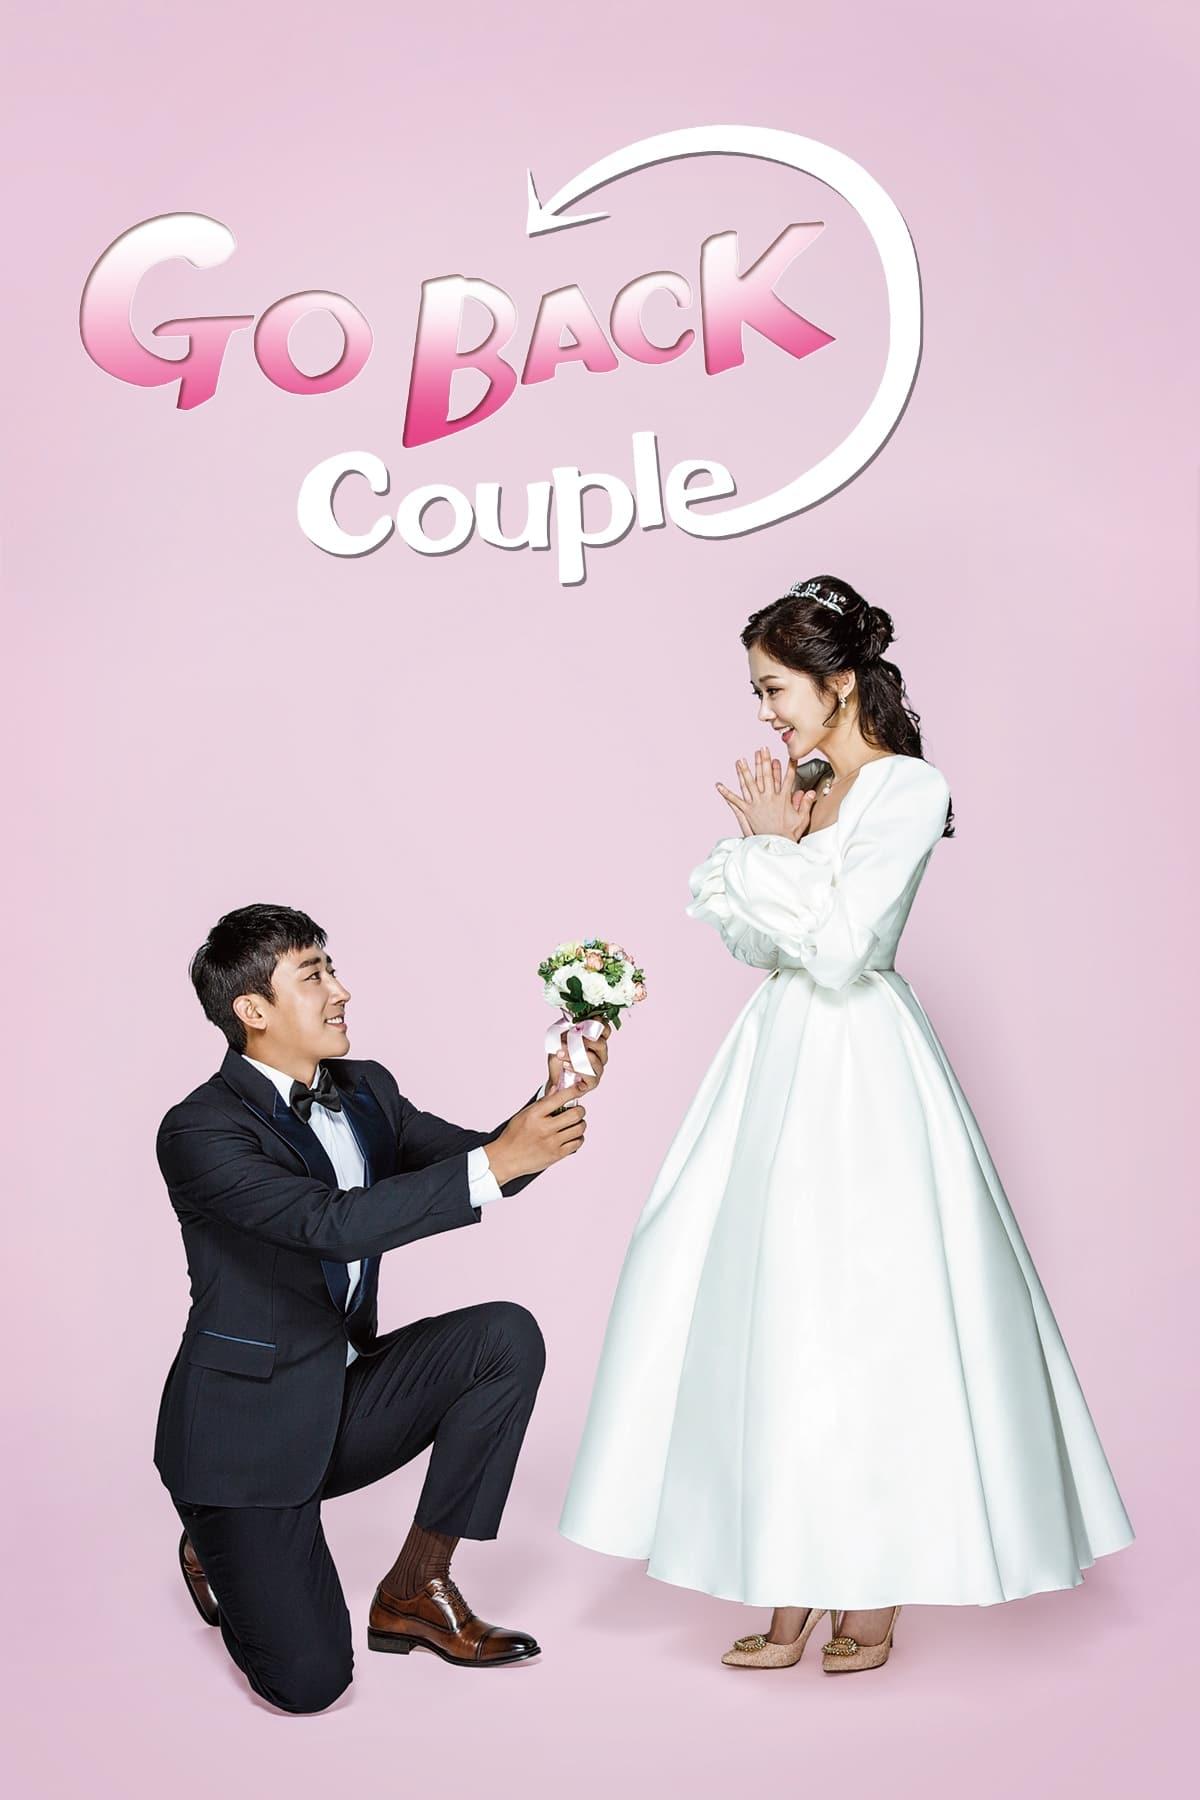 Go Back Couple poster